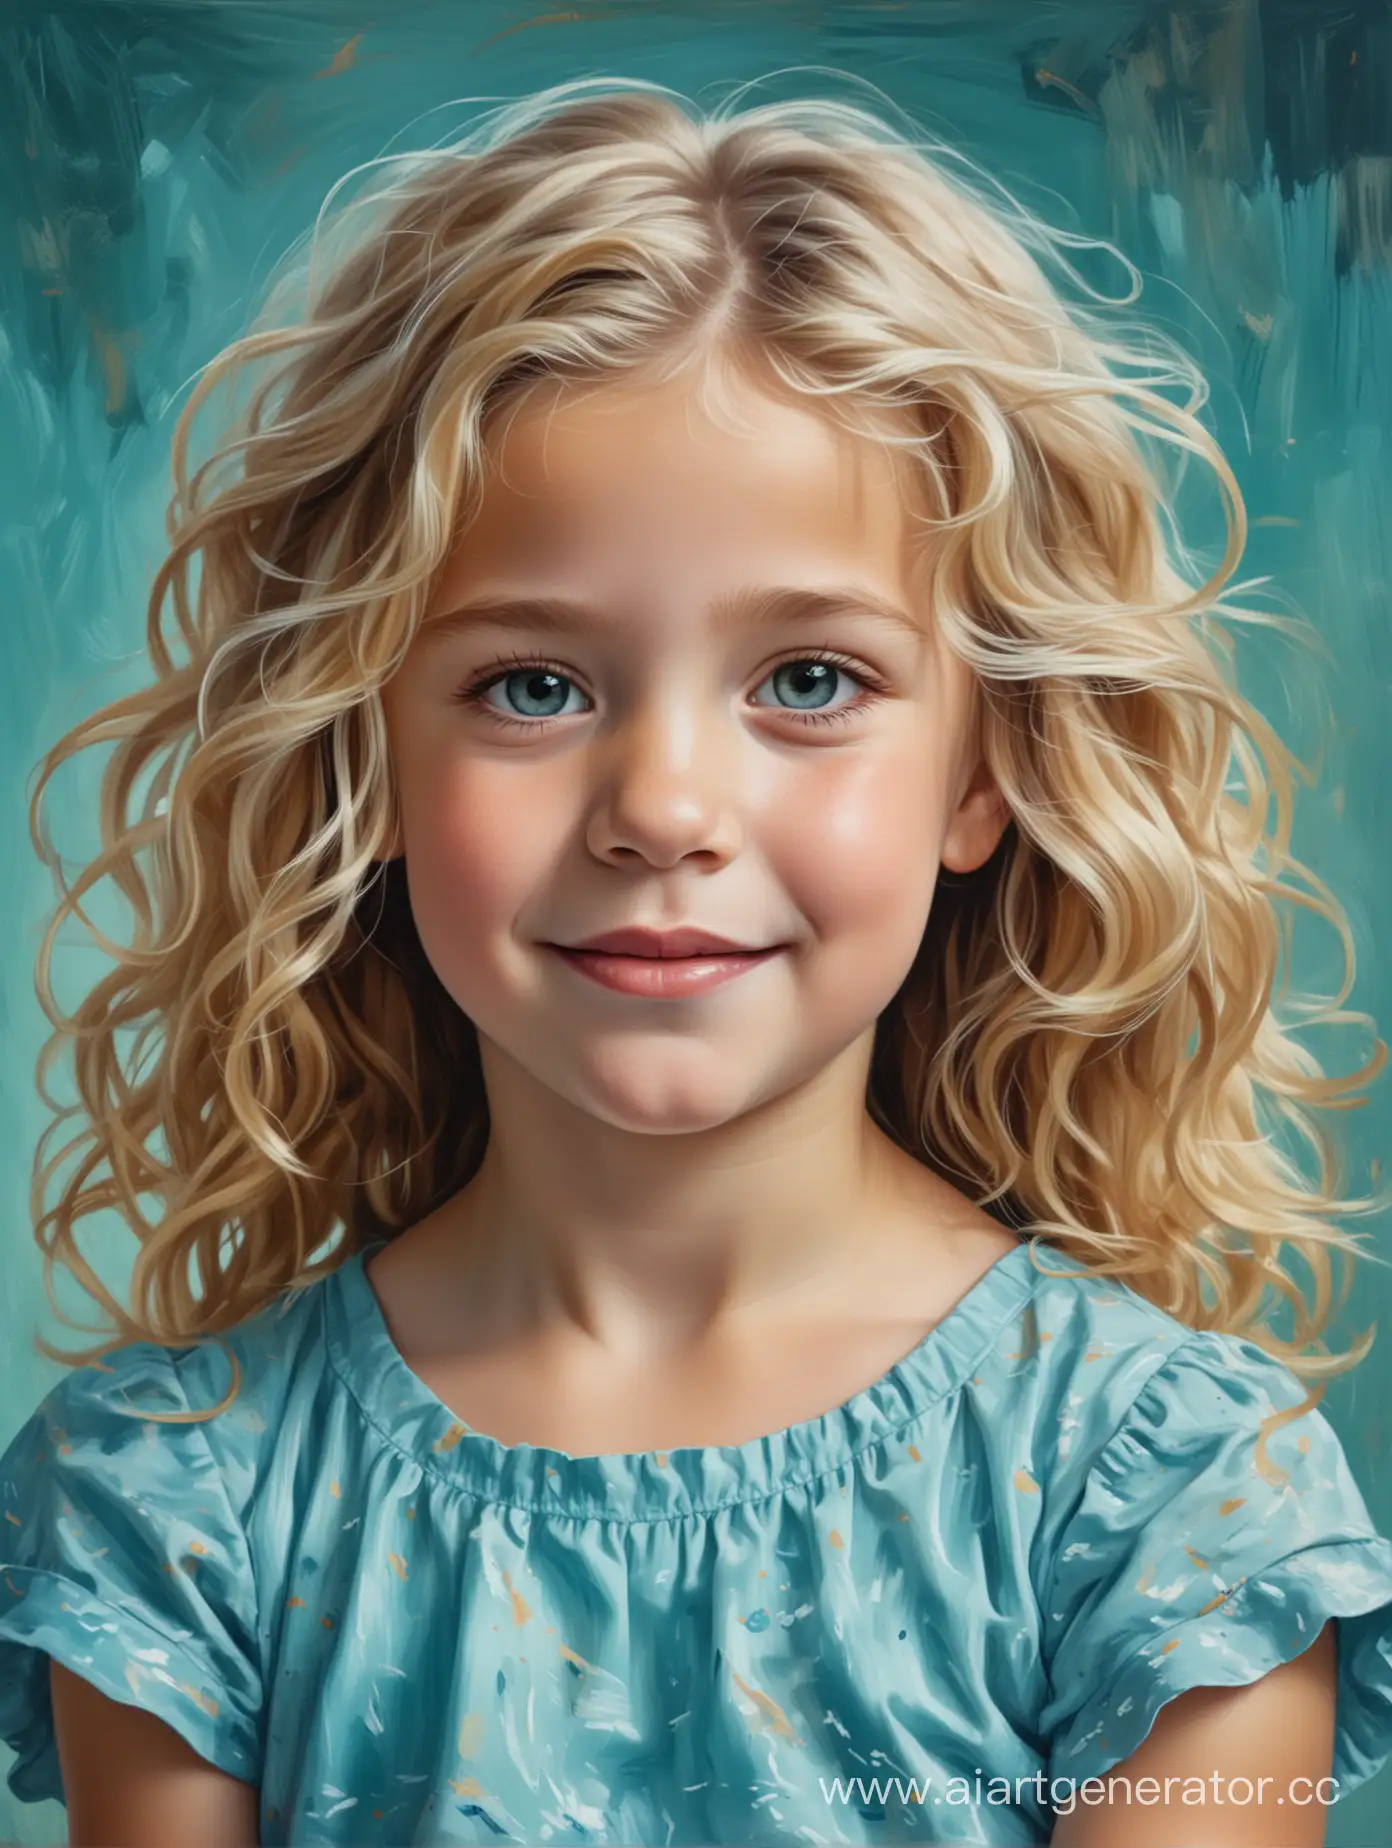 Blonde-Toddler-in-Blue-Dress-with-Turquoise-Brushstrokes